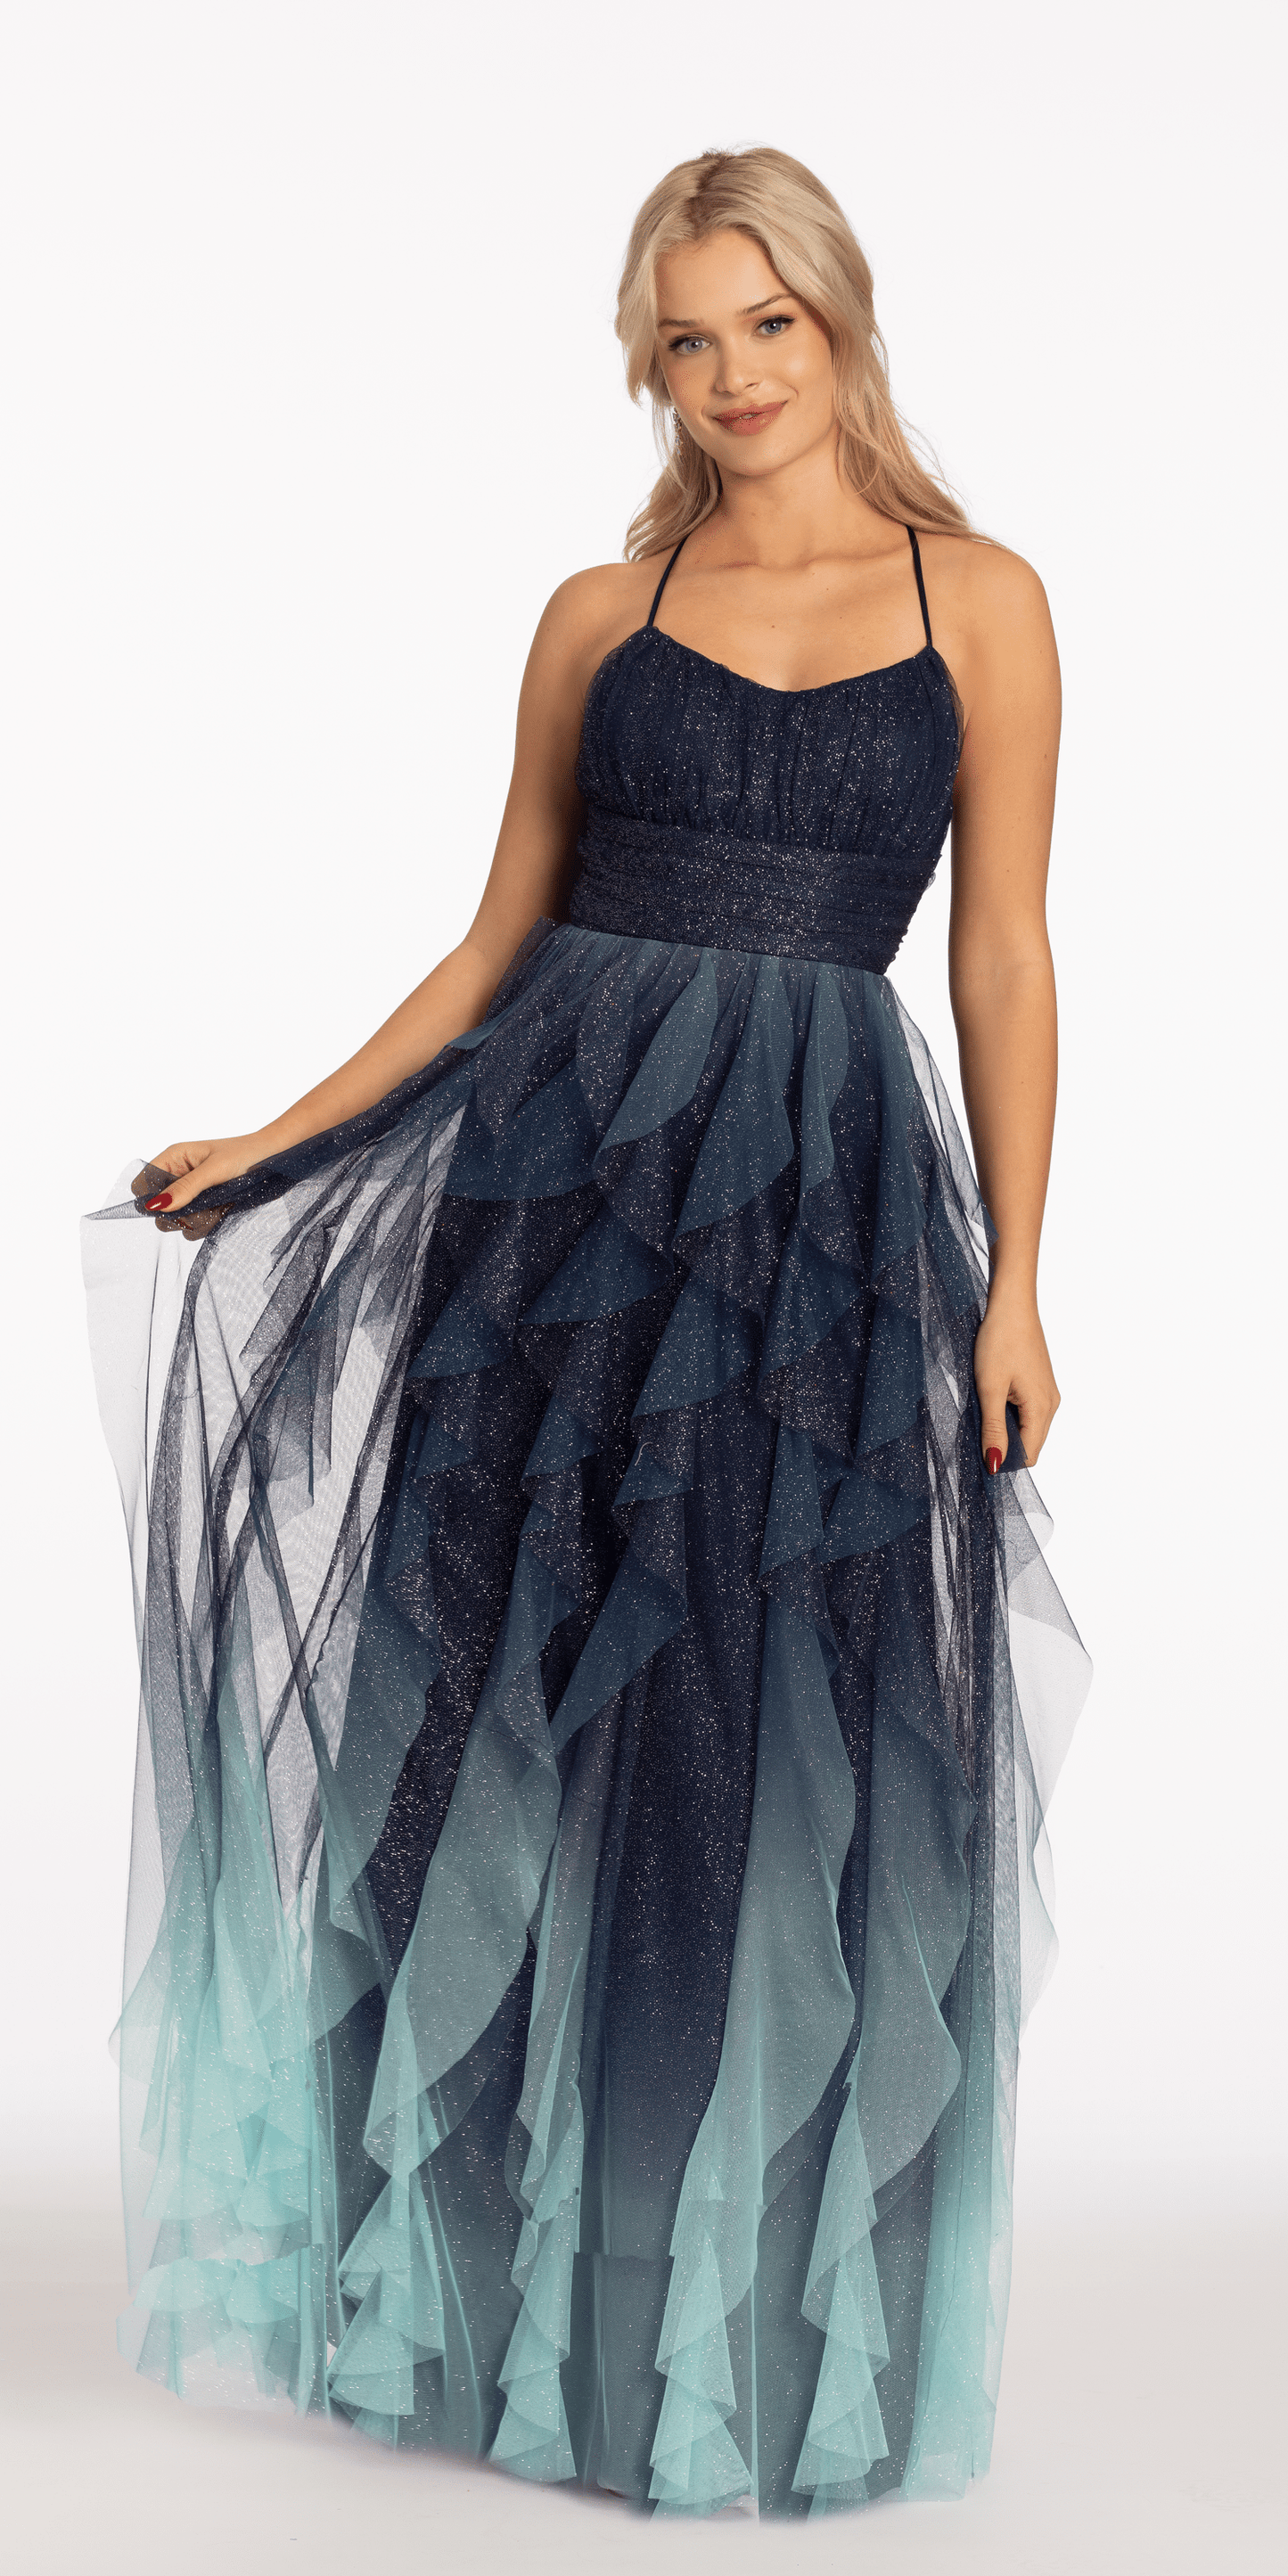 Camille La Vie Ombre Sweetheart Mesh Dress with Tiered Skirt missy / 2 / navy